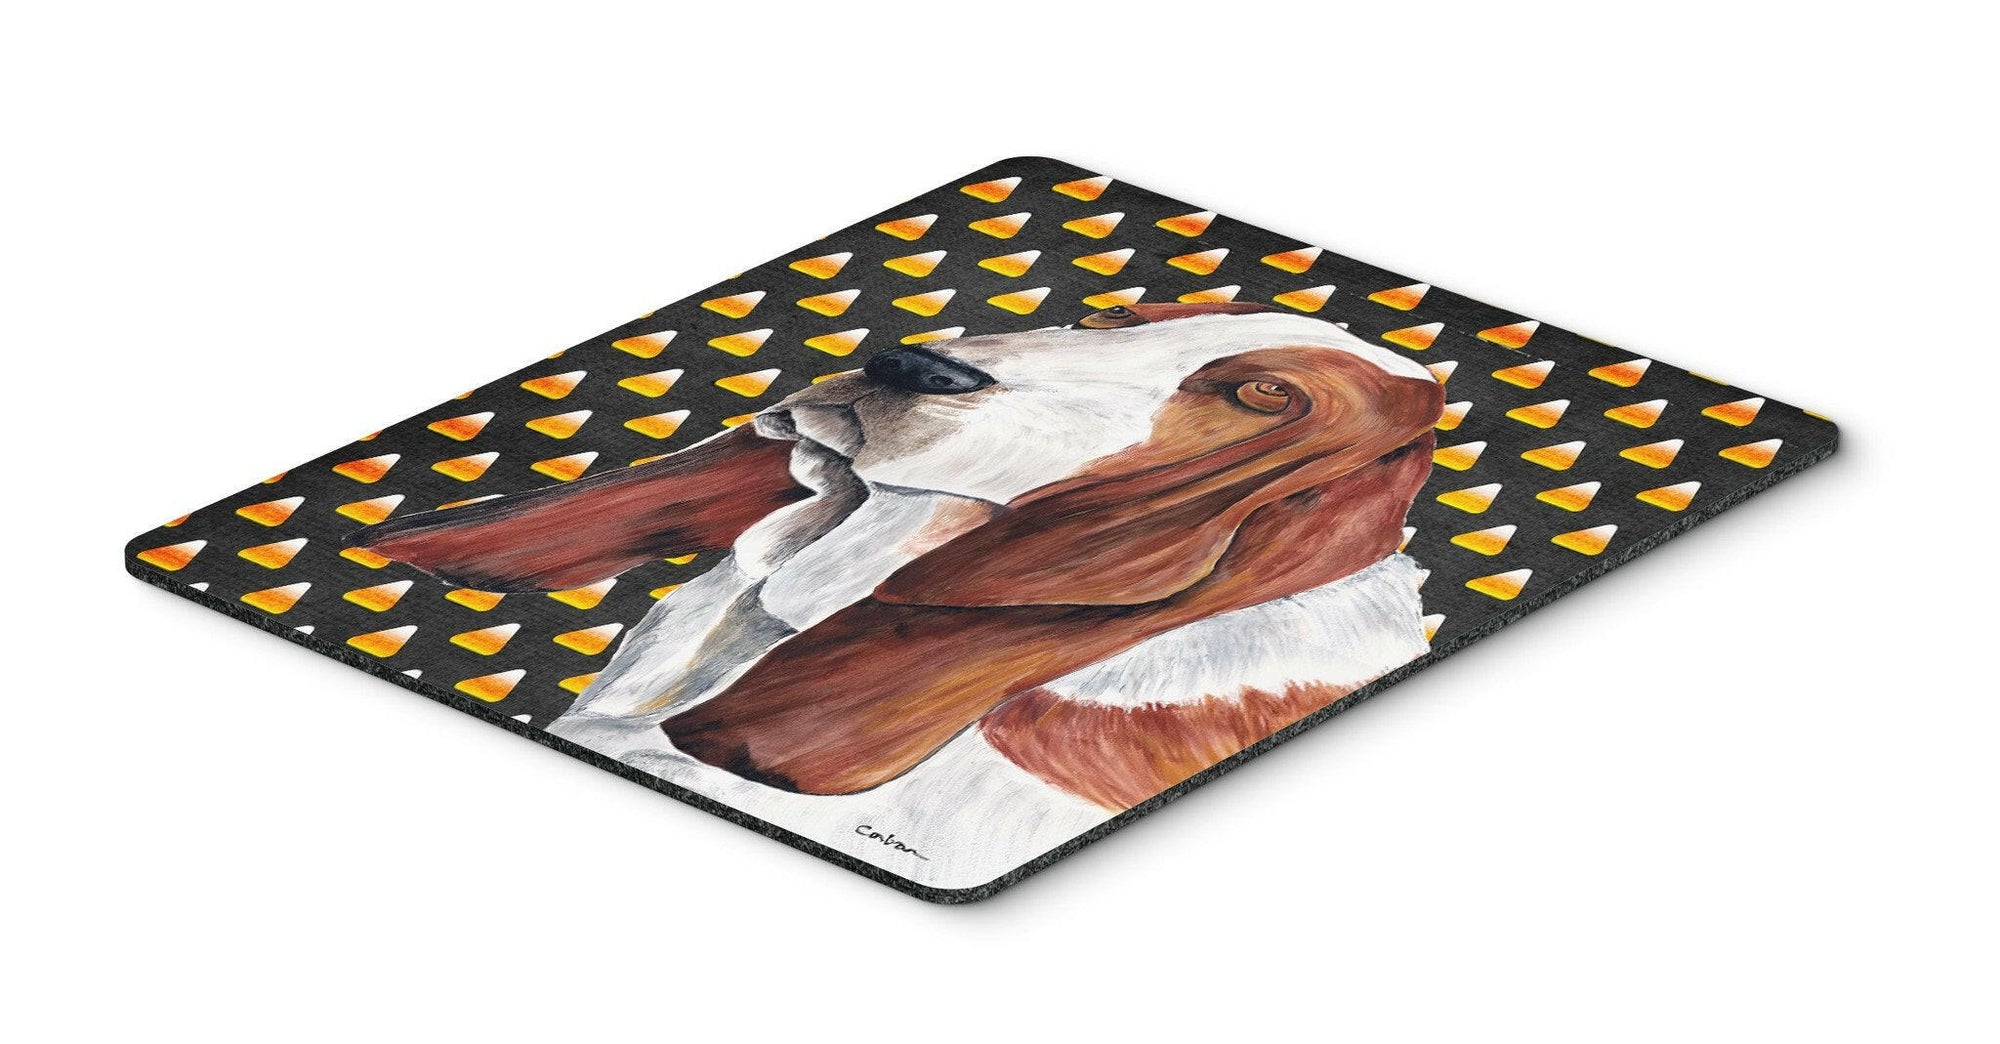 Basset Hound Candy Corn Halloween Portrait Mouse Pad, Hot Pad or Trivet by Caroline's Treasures